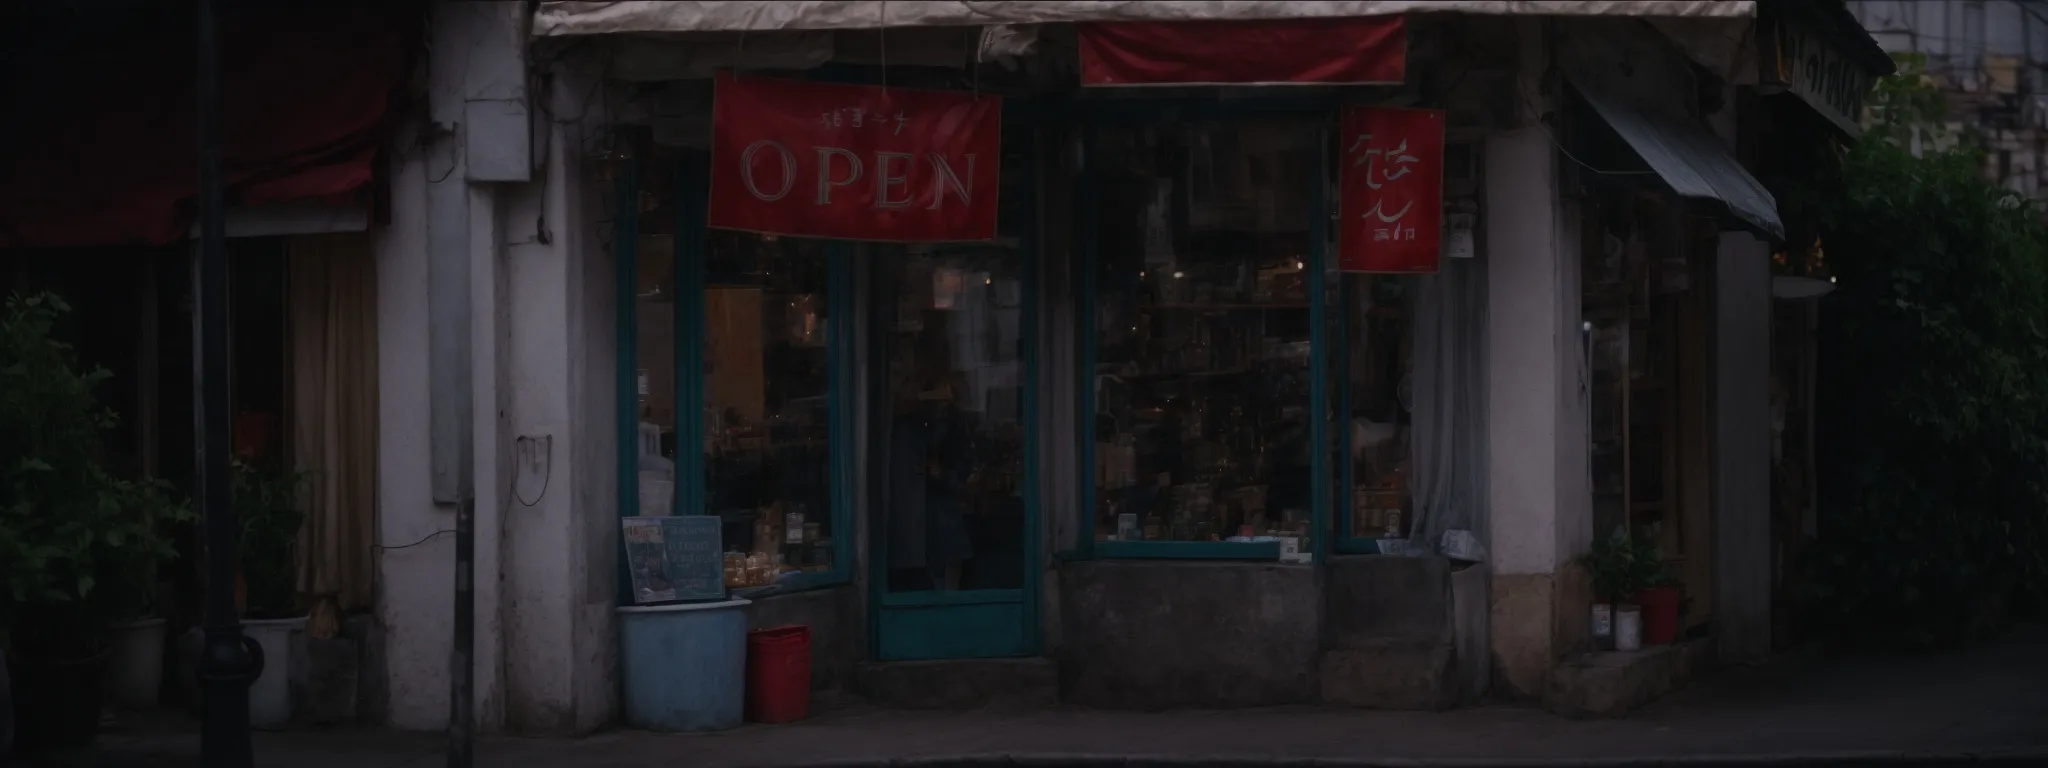 a shopkeeper placing an 'open' sign in front of a small boutique to attract local customers.